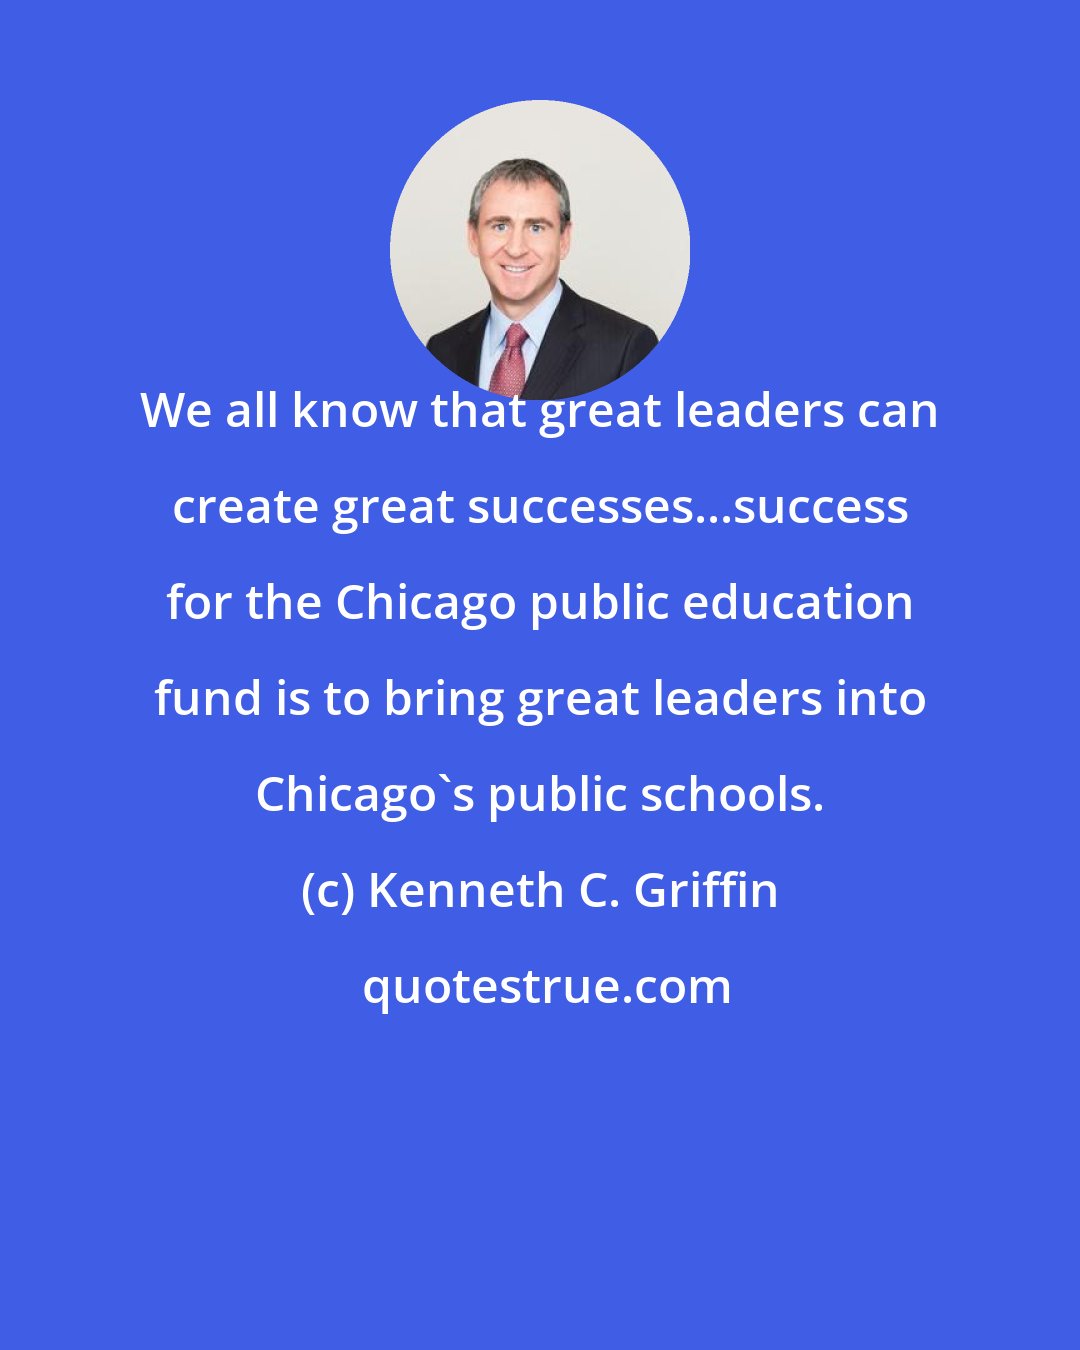 Kenneth C. Griffin: We all know that great leaders can create great successes...success for the Chicago public education fund is to bring great leaders into Chicago's public schools.